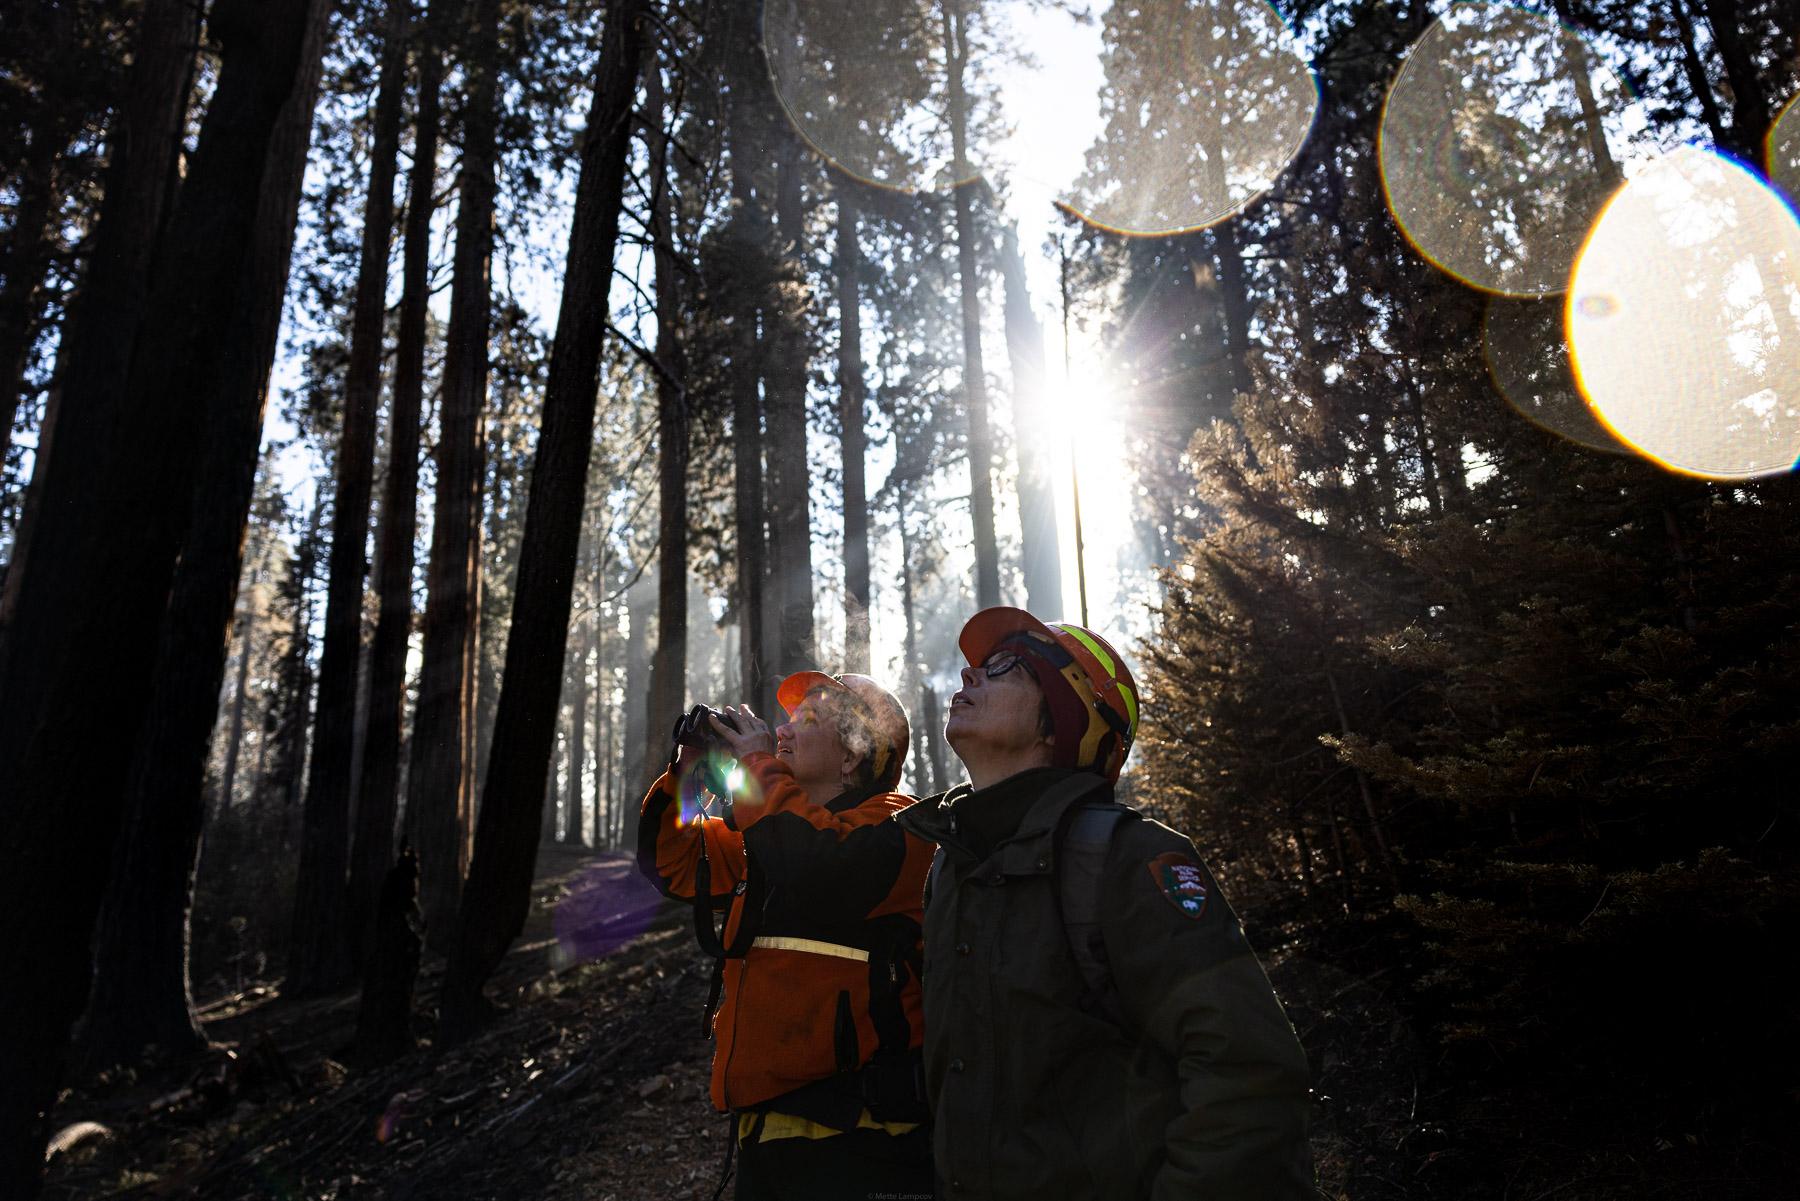 - Sequoia, a year in a burning forest - “The big trees were healthy” While Sequoia...